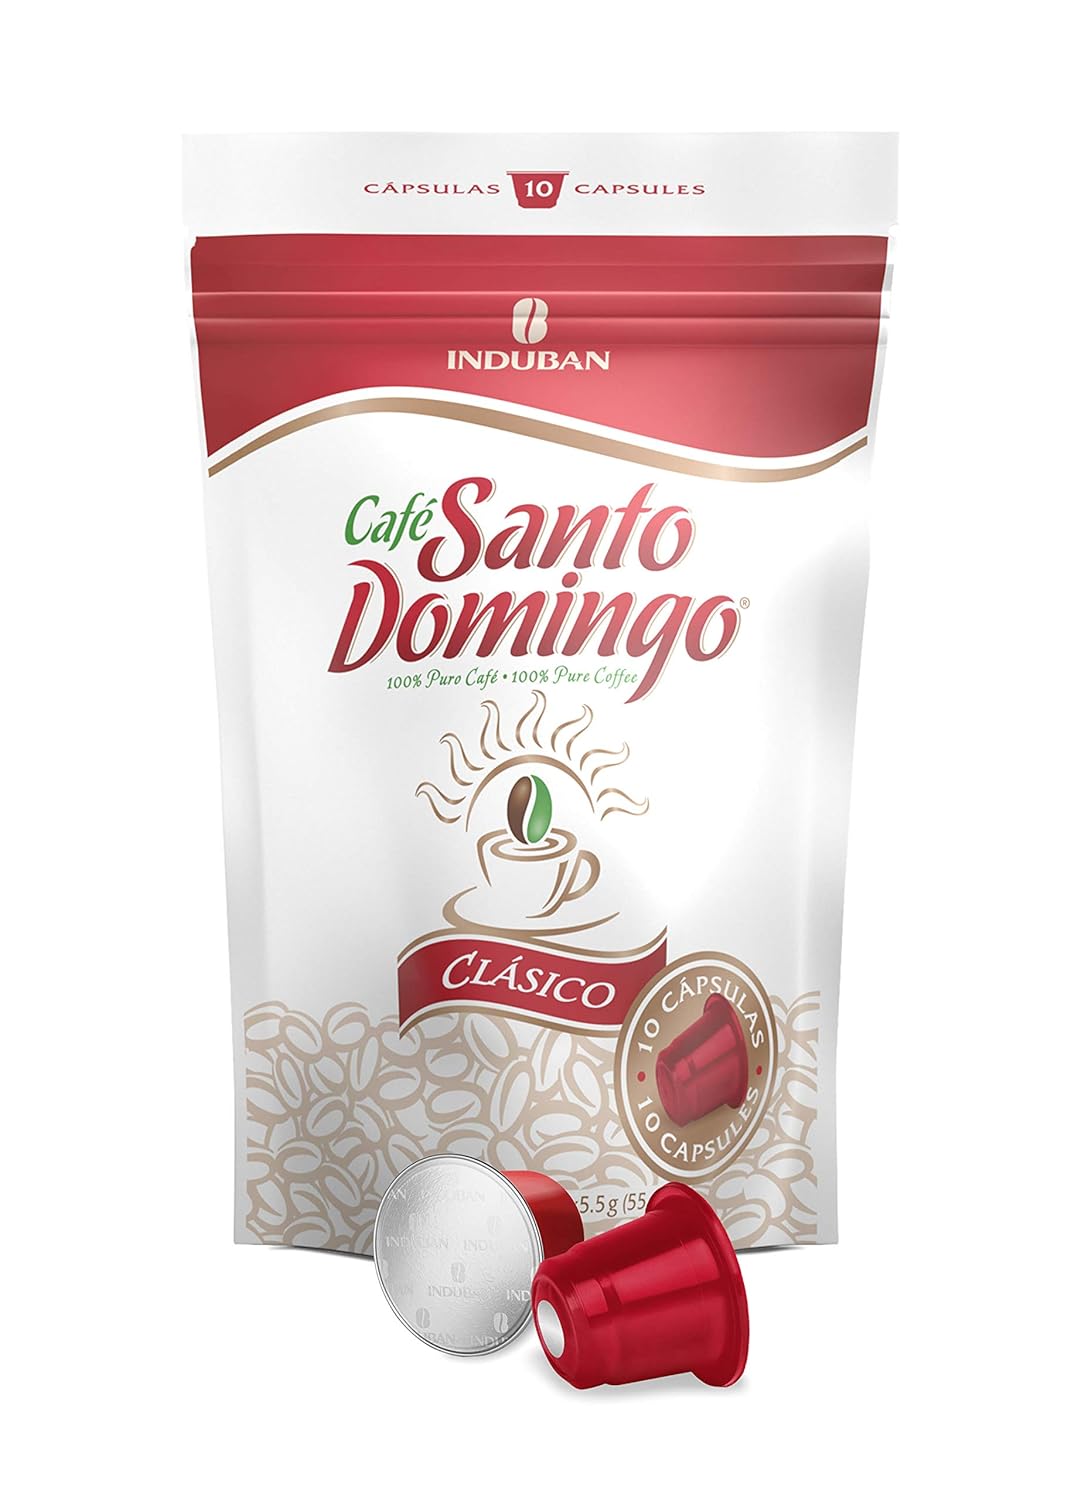 Santo Domingo Coffee Capsules - Compatible with Nespresso Original Brewers - Product from the Dominican Republic (10 Count)